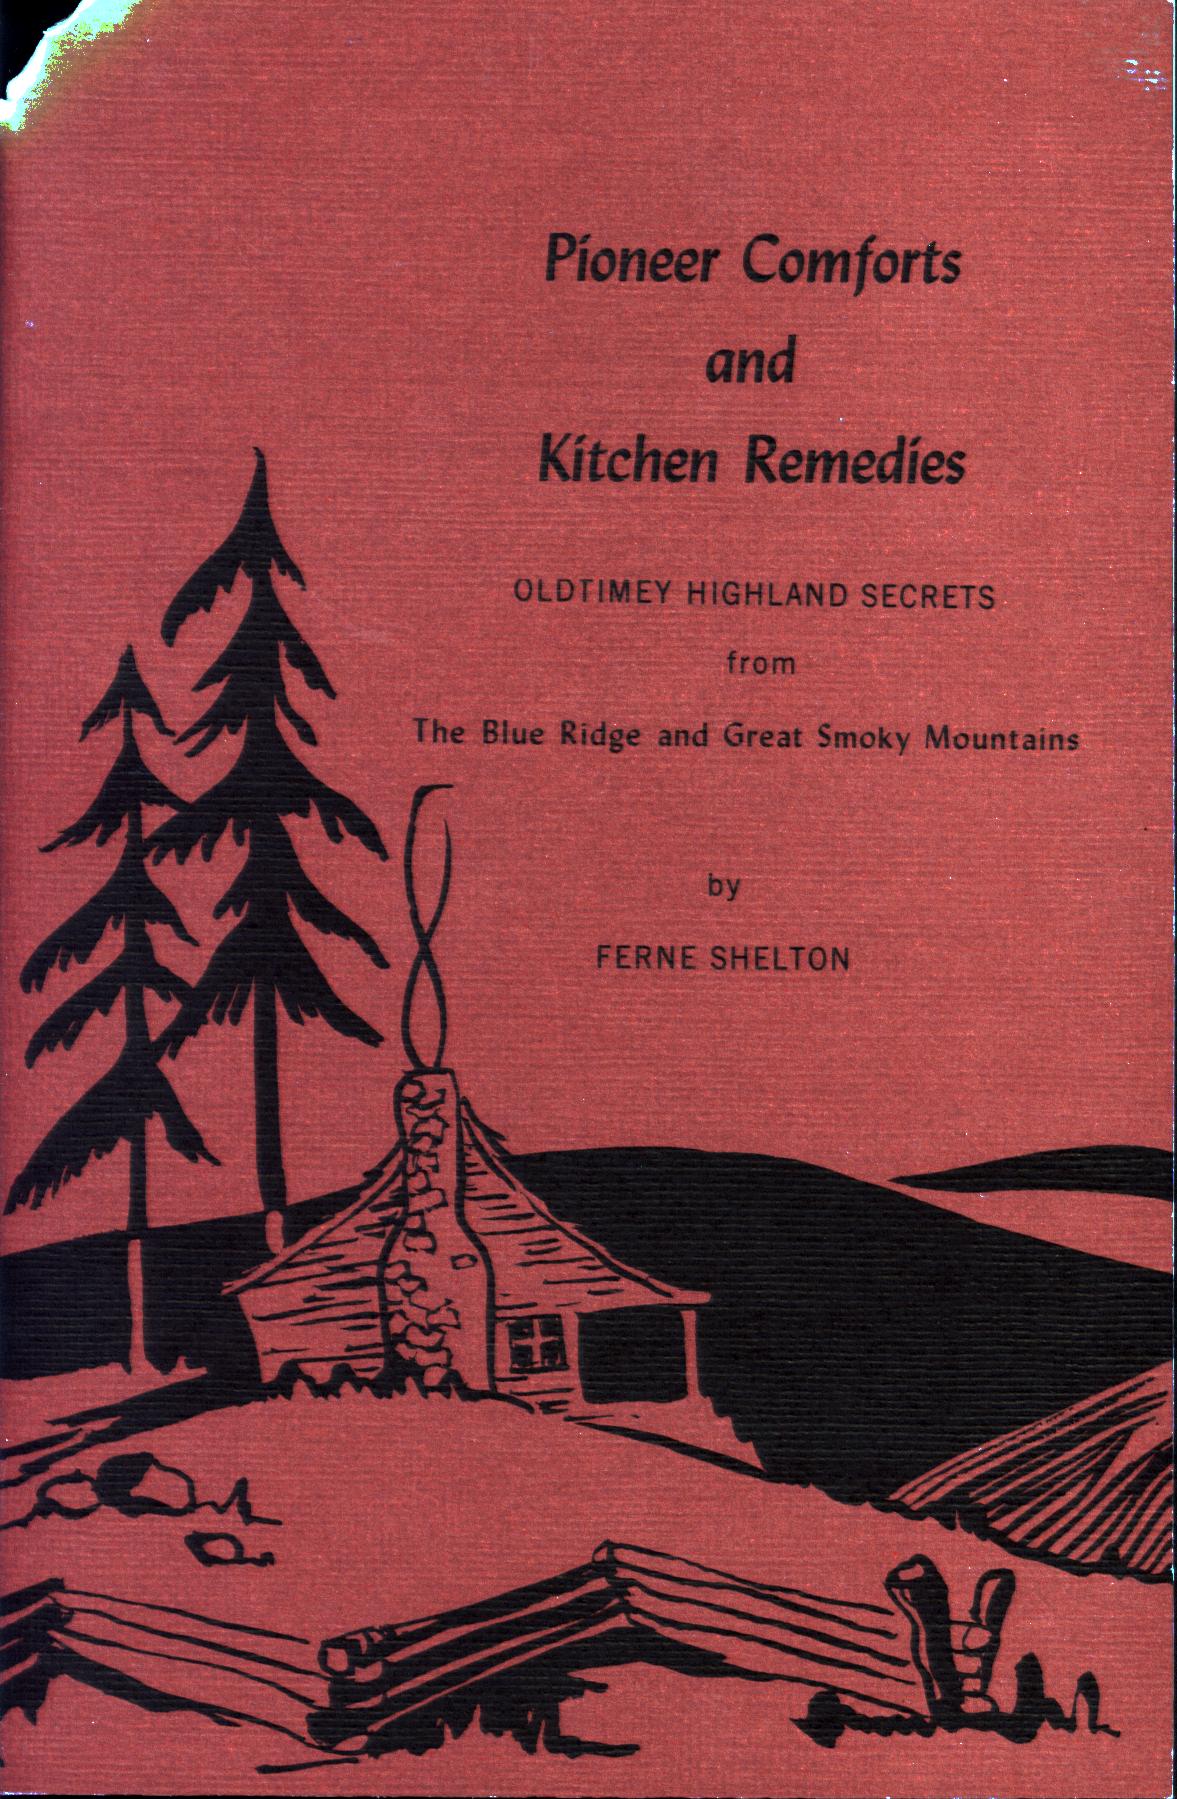 PIONEER COMFORTS AND KITCHEN REMEDIES: old-timey highland secrets from the Blue Ridge and Great Smoky Mountain